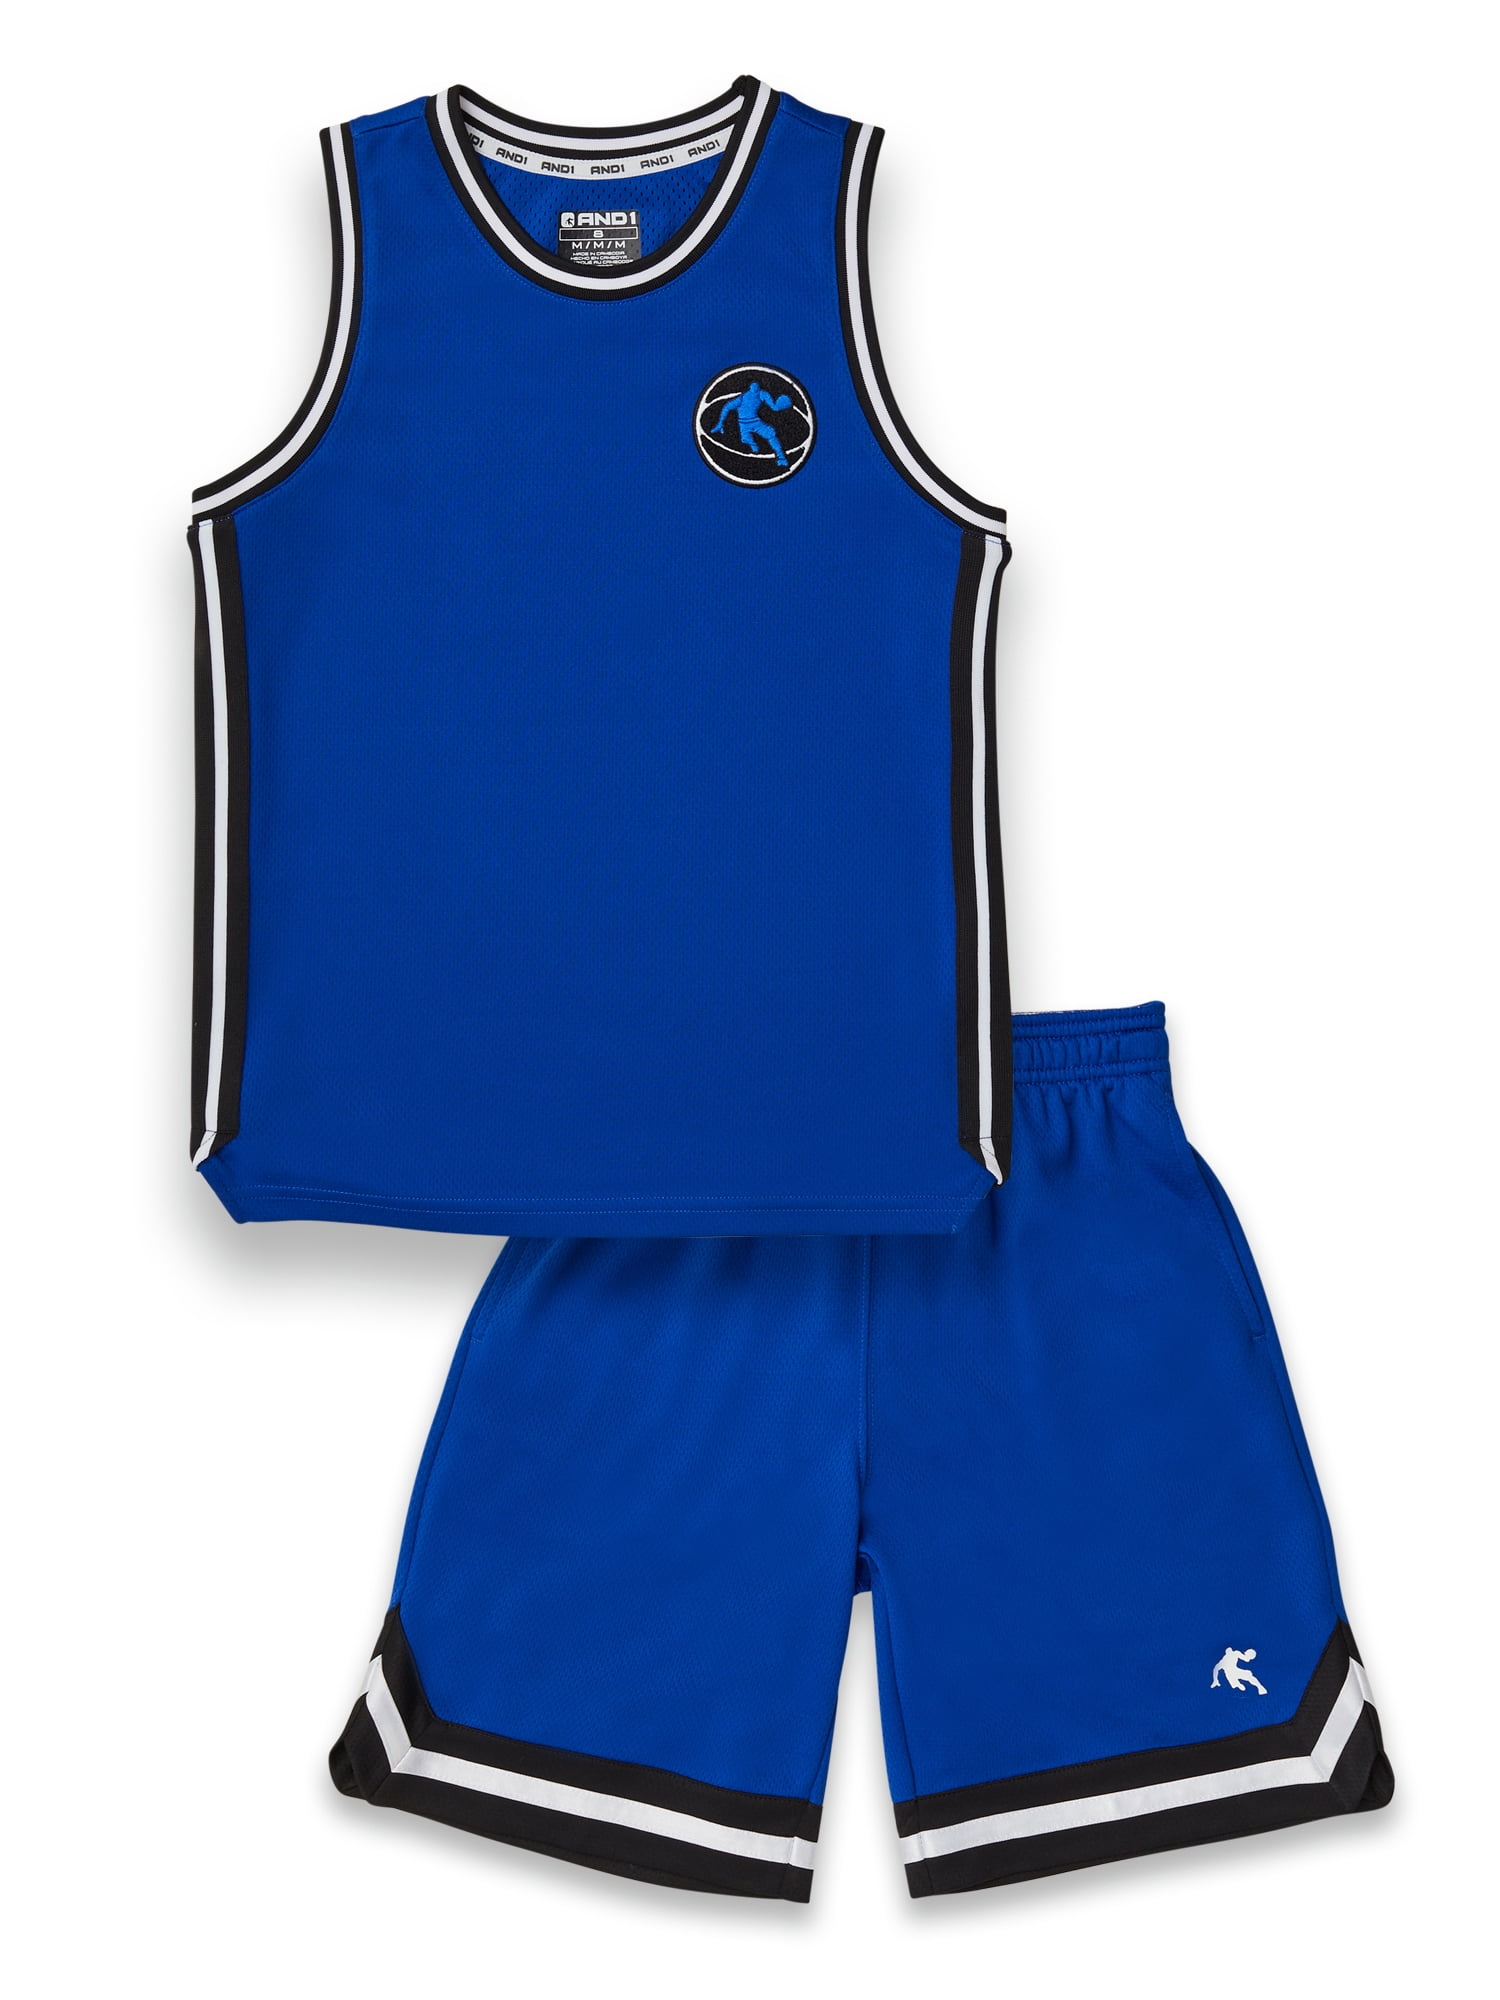 AND1 Men's Basketball Jersey - Bed Bath & Beyond - 1558609